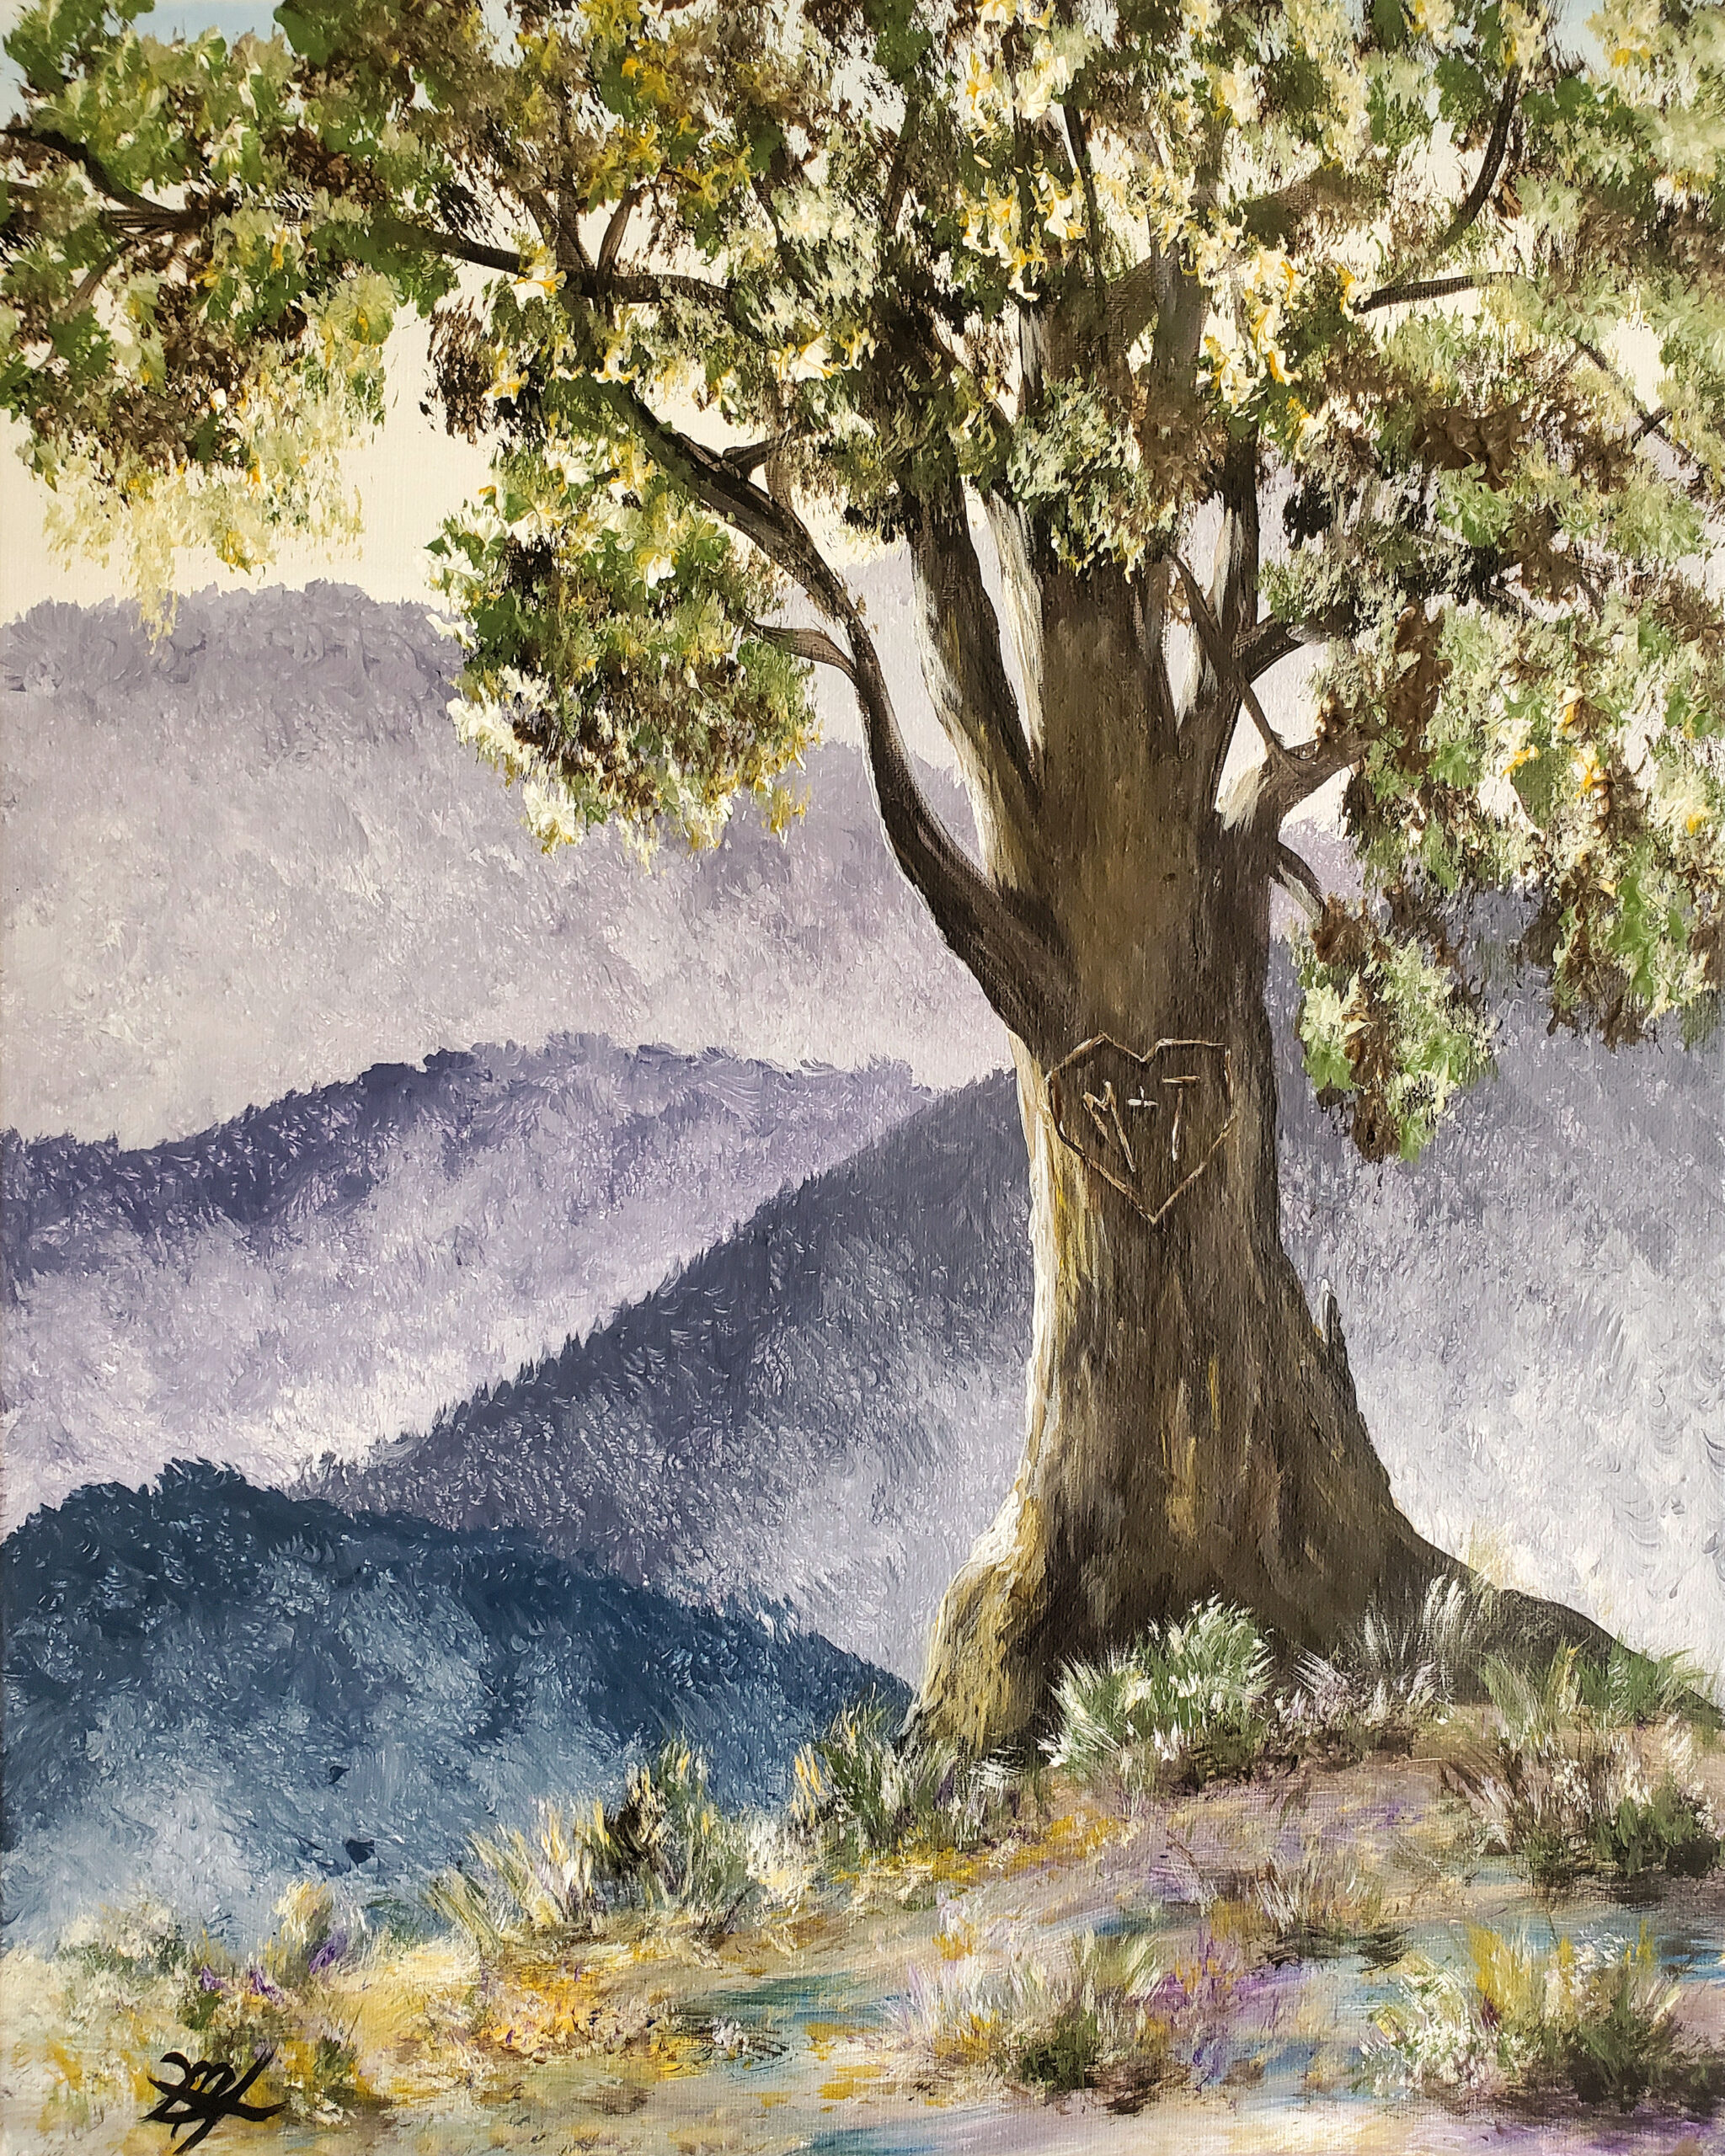 Berkshire Paint and Sip will host a Virtual Fundraiser for First Fridays Artswalk on Friday, June 4 at 6 pm. Attendees will learn how to paint a landscape image of “Mountain Love Tree” in real time with feedback from the instructor.